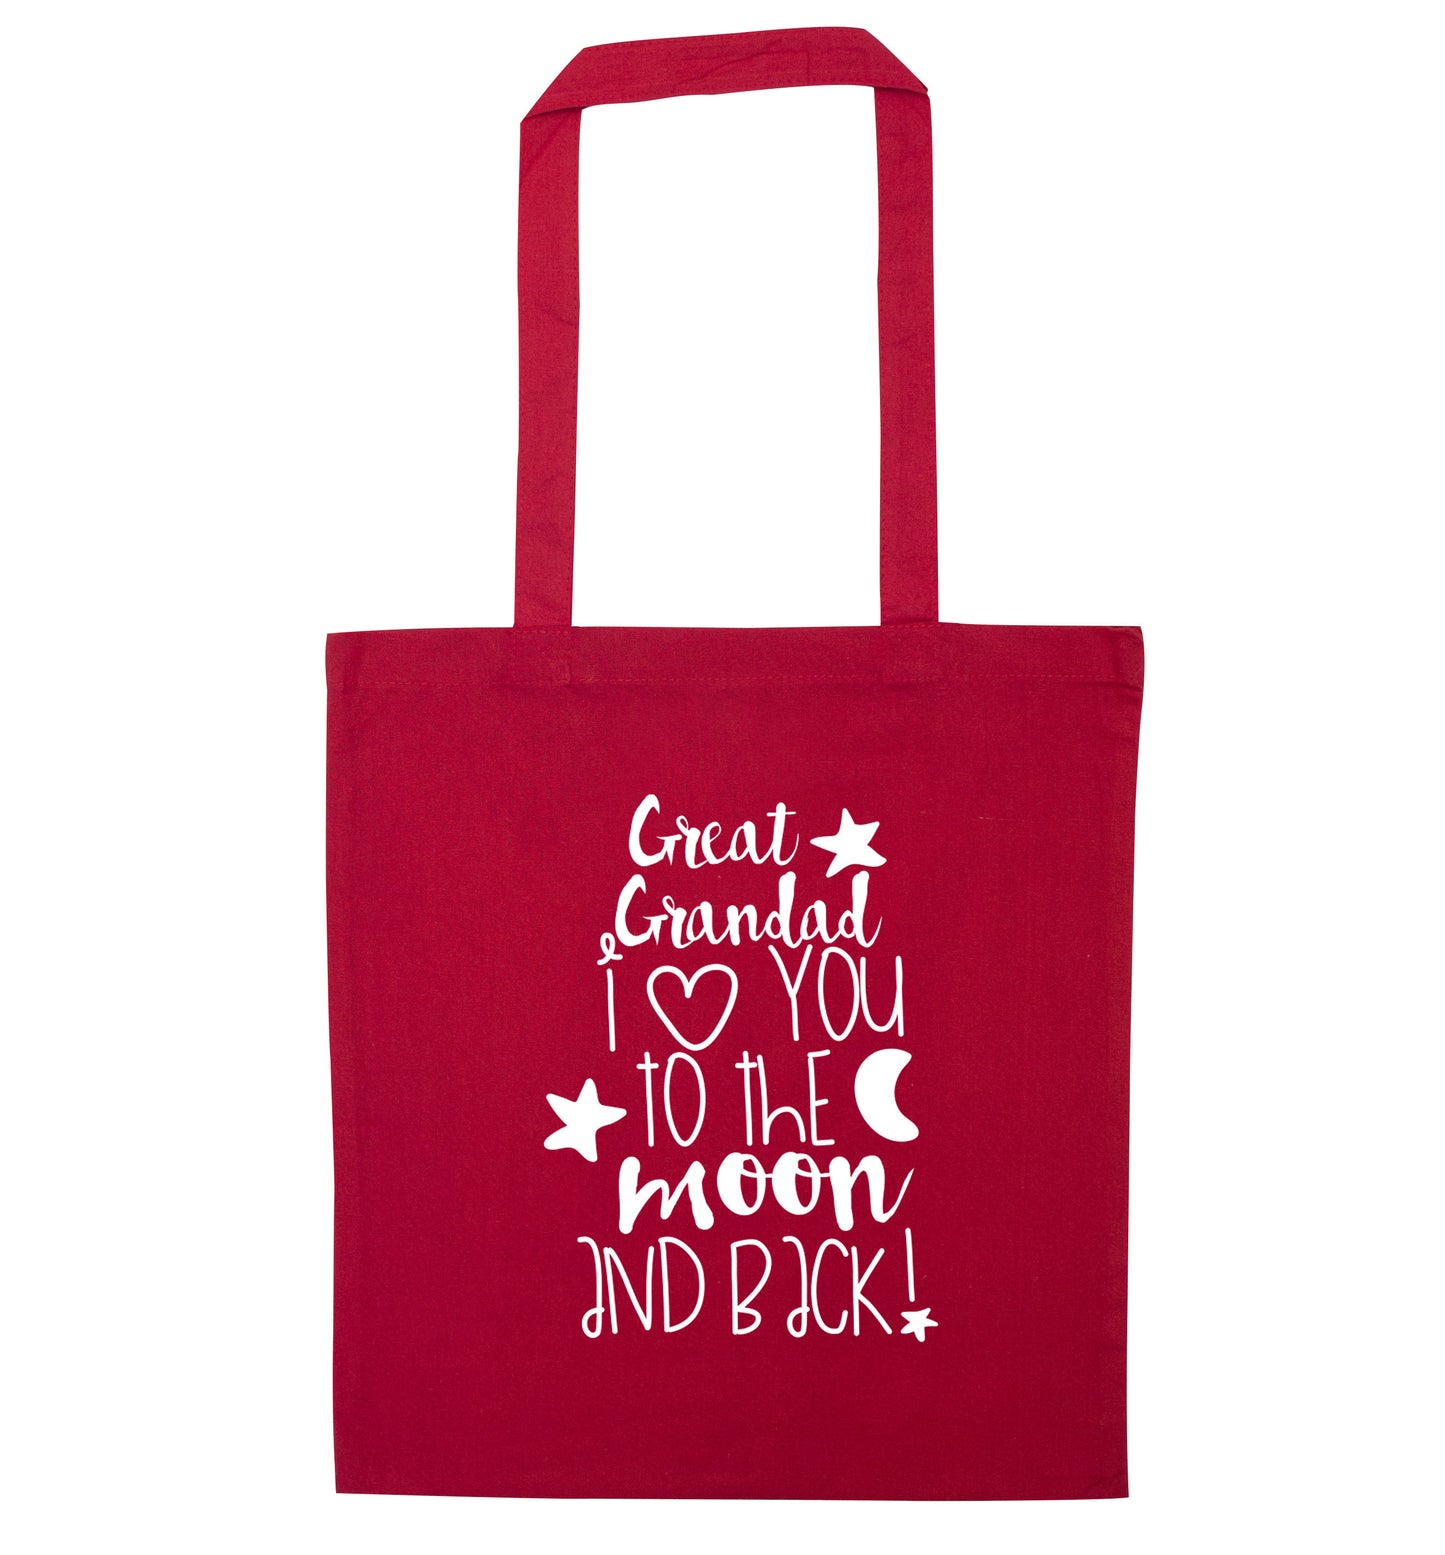 Great Grandad I love you to the moon and back red tote bag